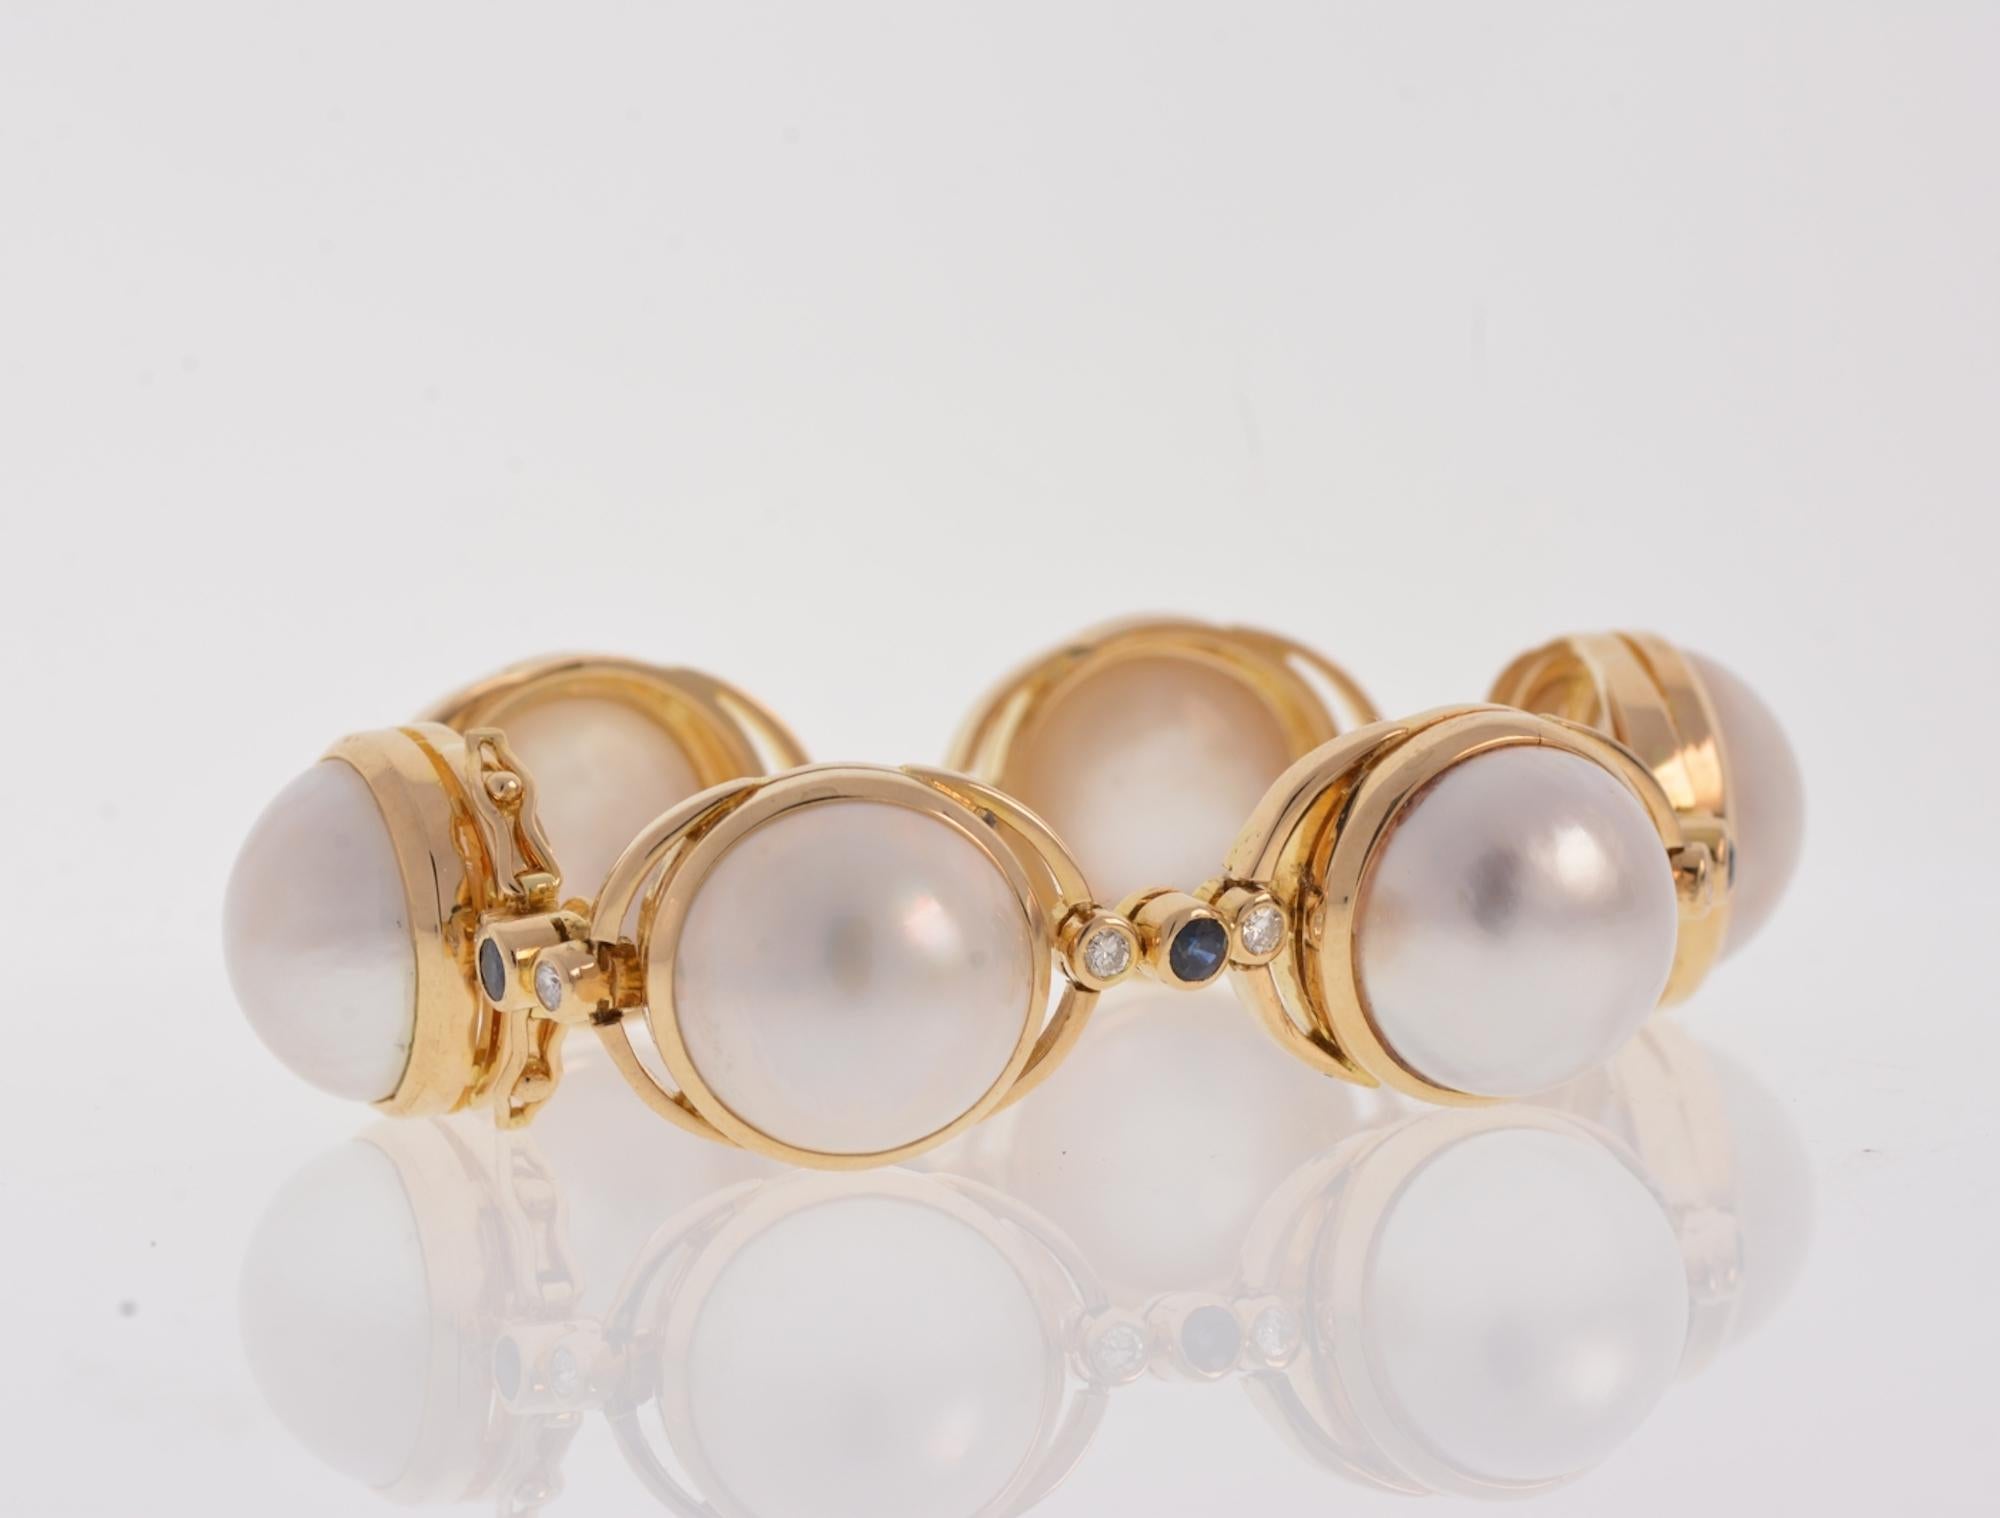 Mother of Pearl Bracelet 18k Yellow Gold with Diamonds & Sapphires 50.70 grams

Main Stone:
Mother of Pearl
Metal:
18k Yellow Gold
Secondary Stones:
Diamonds   .50tcw
Sapphires
Diamonds Color:
GH
Diamonds Clarity:
SI2-I1
Total Gram